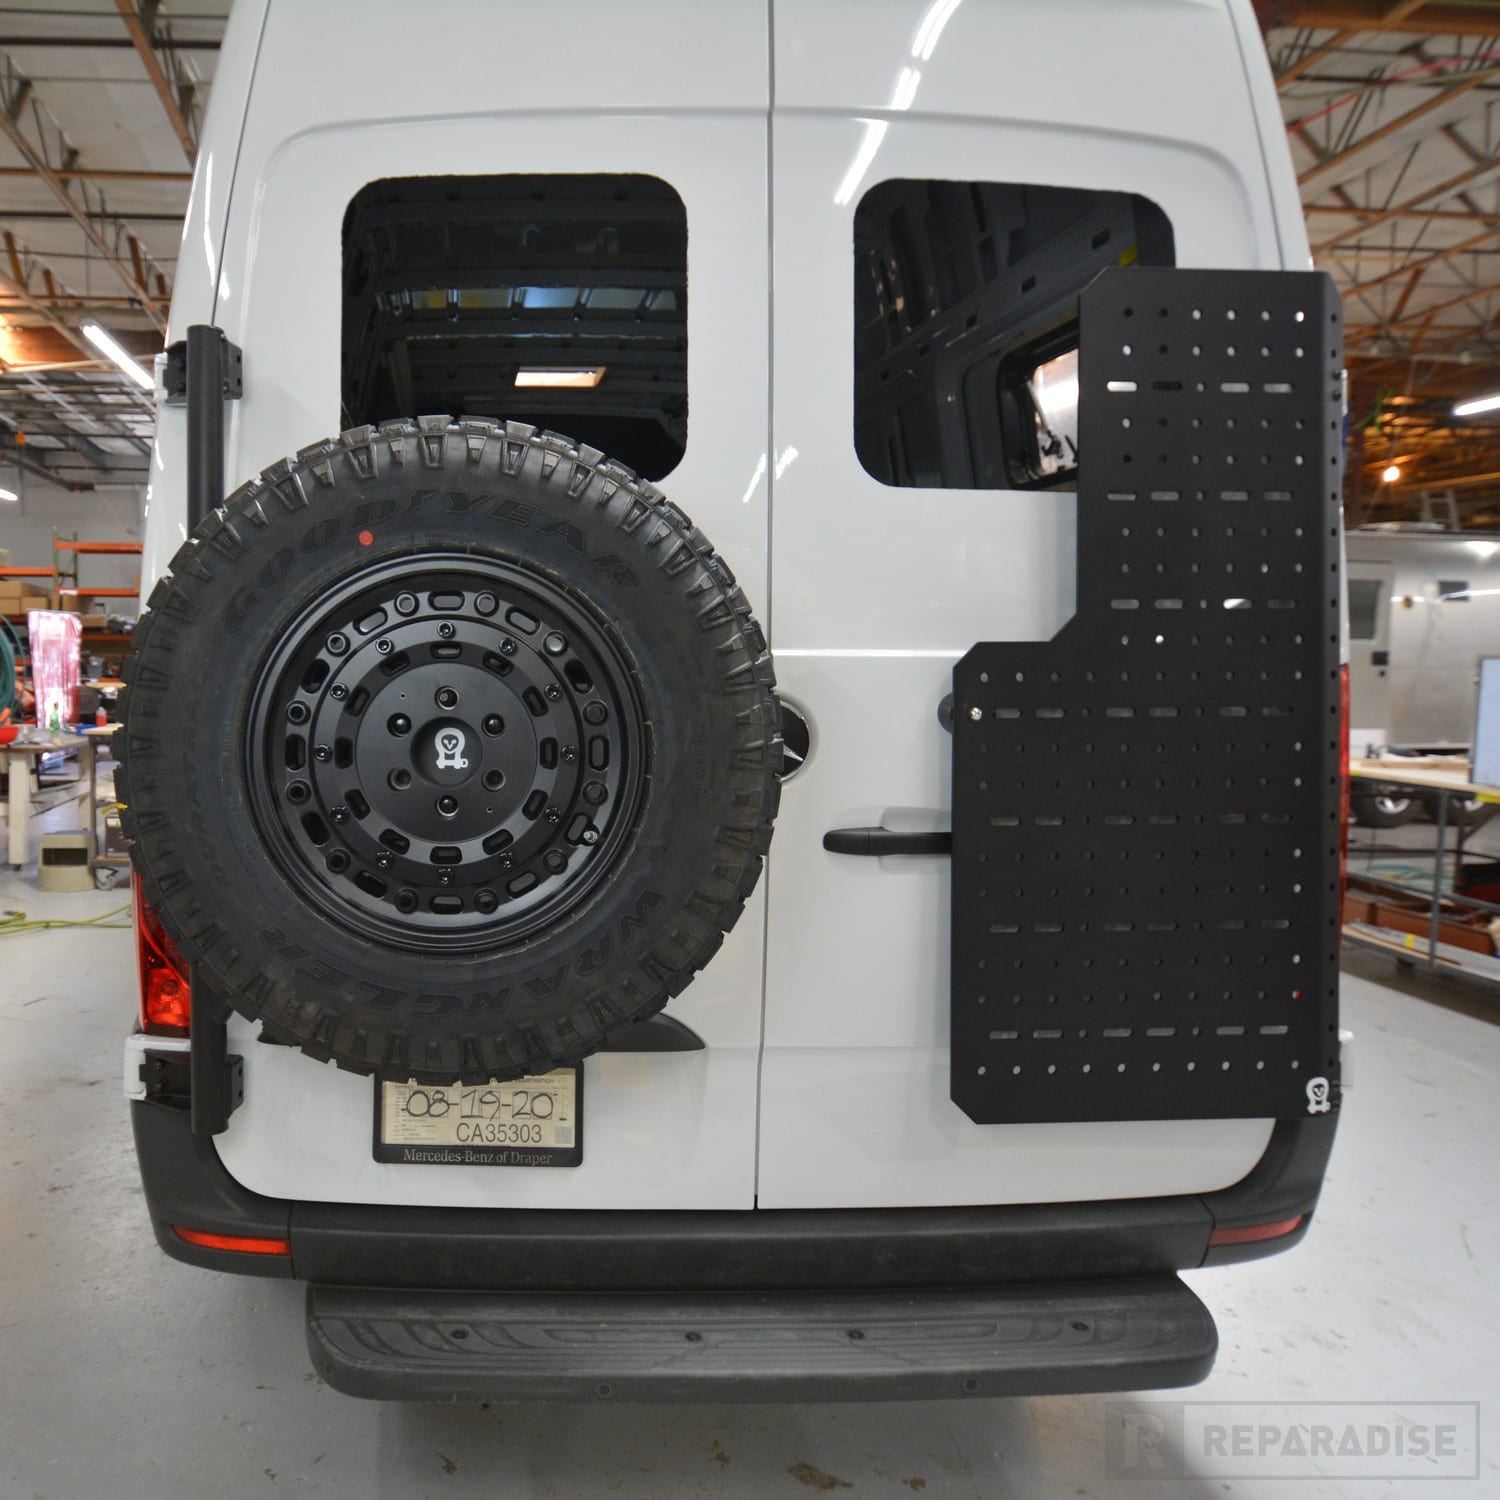 The Owl Sprinter Tire Carrier is the 